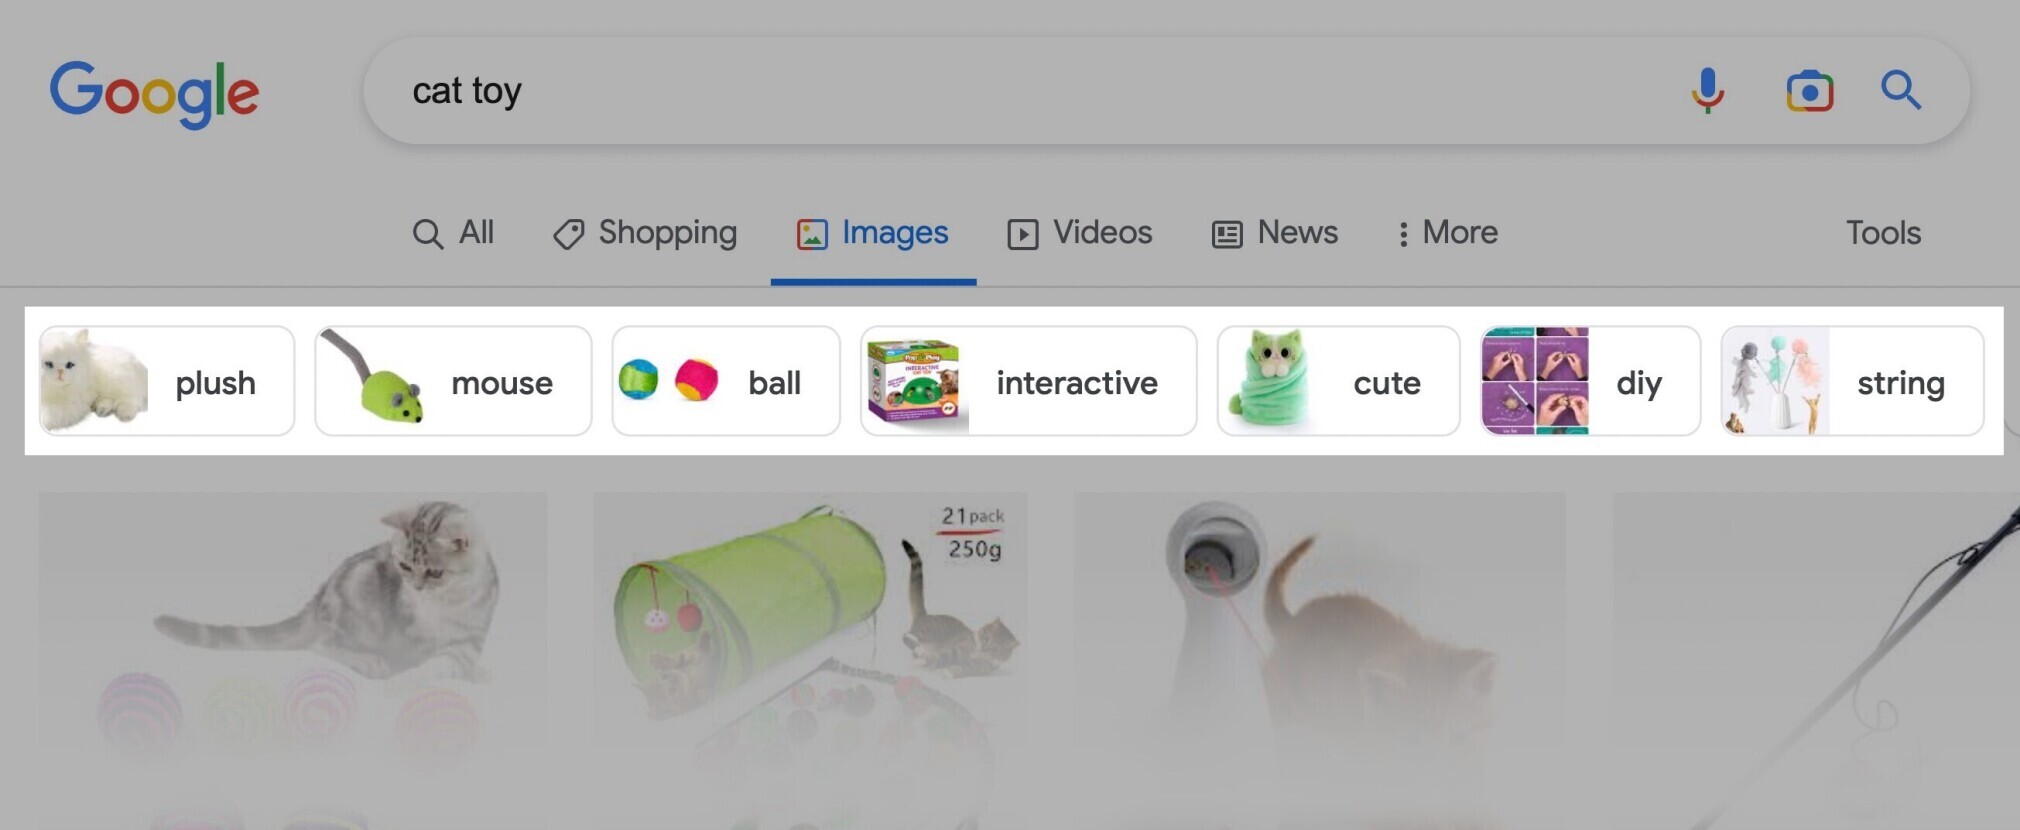 Google Image tags for the keyword "cat toys"